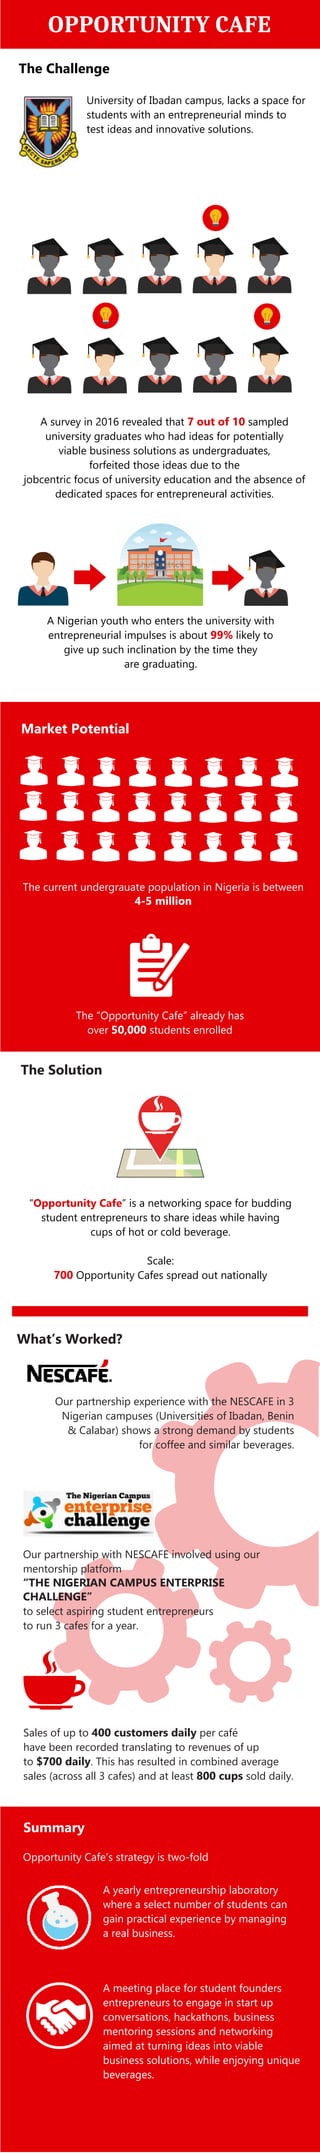 OPPORTUNITY CAFE
University of Ibadan campus, lacks a space for
students with an entrepreneurial minds to
test ideas and innovative solutions.
The Challenge
A survey in 2016 revealed that sampled7 out of 10
university graduates who had ideas for potentially
viable business solutions as undergraduates,
forfeited those ideas due to the
jobcentric focus of university education and the absence of
dedicated spaces for entrepreneural activities.
“ ” is a networking space for buddingOpportunity Cafe
student entrepreneurs to share ideas while having
cups of hot or cold beverage.
Scale:
Opportunity Cafes spread out nationally700
What’s Worked?
A Nigerian youth who enters the university with
entrepreneurial impulses is about likely to99%
give up such inclination by the time they
are graduating.
The current undergrauate population in Nigeria is between
4-5 million
The “Opportunity Cafe” already has
over 50,000 students enrolled
Market Potential
The Solution
Our partnership with NESCAFE involved using our
mentorship platform
“THE NIGERIAN CAMPUS ENTERPRISE
CHALLENGE”
to select aspiring student entrepreneurs
to run 3 cafes for a year.
Sales of up to 400 customers daily per café
have been recorded translating to revenues of up
to $700 daily. This has resulted in combined average
sales (across all 3 cafes) and at least 800 cups sold daily.
Summary
Opportunity Cafe’s strategy is two-fold
A yearly entrepreneurship laboratory
where a select number of students can
gain practical experience by managing
a real business.
A meeting place for student founders
entrepreneurs to engage in start up
conversations, hackathons, business
mentoring sessions and networking
aimed at turning ideas into viable
business solutions, while enjoying unique
beverages.
Our partnership experience with the NESCAFE in 3
Nigerian campuses (Universities of Ibadan, Benin
& Calabar) shows a strong demand by students
for coffee and similar beverages.
 